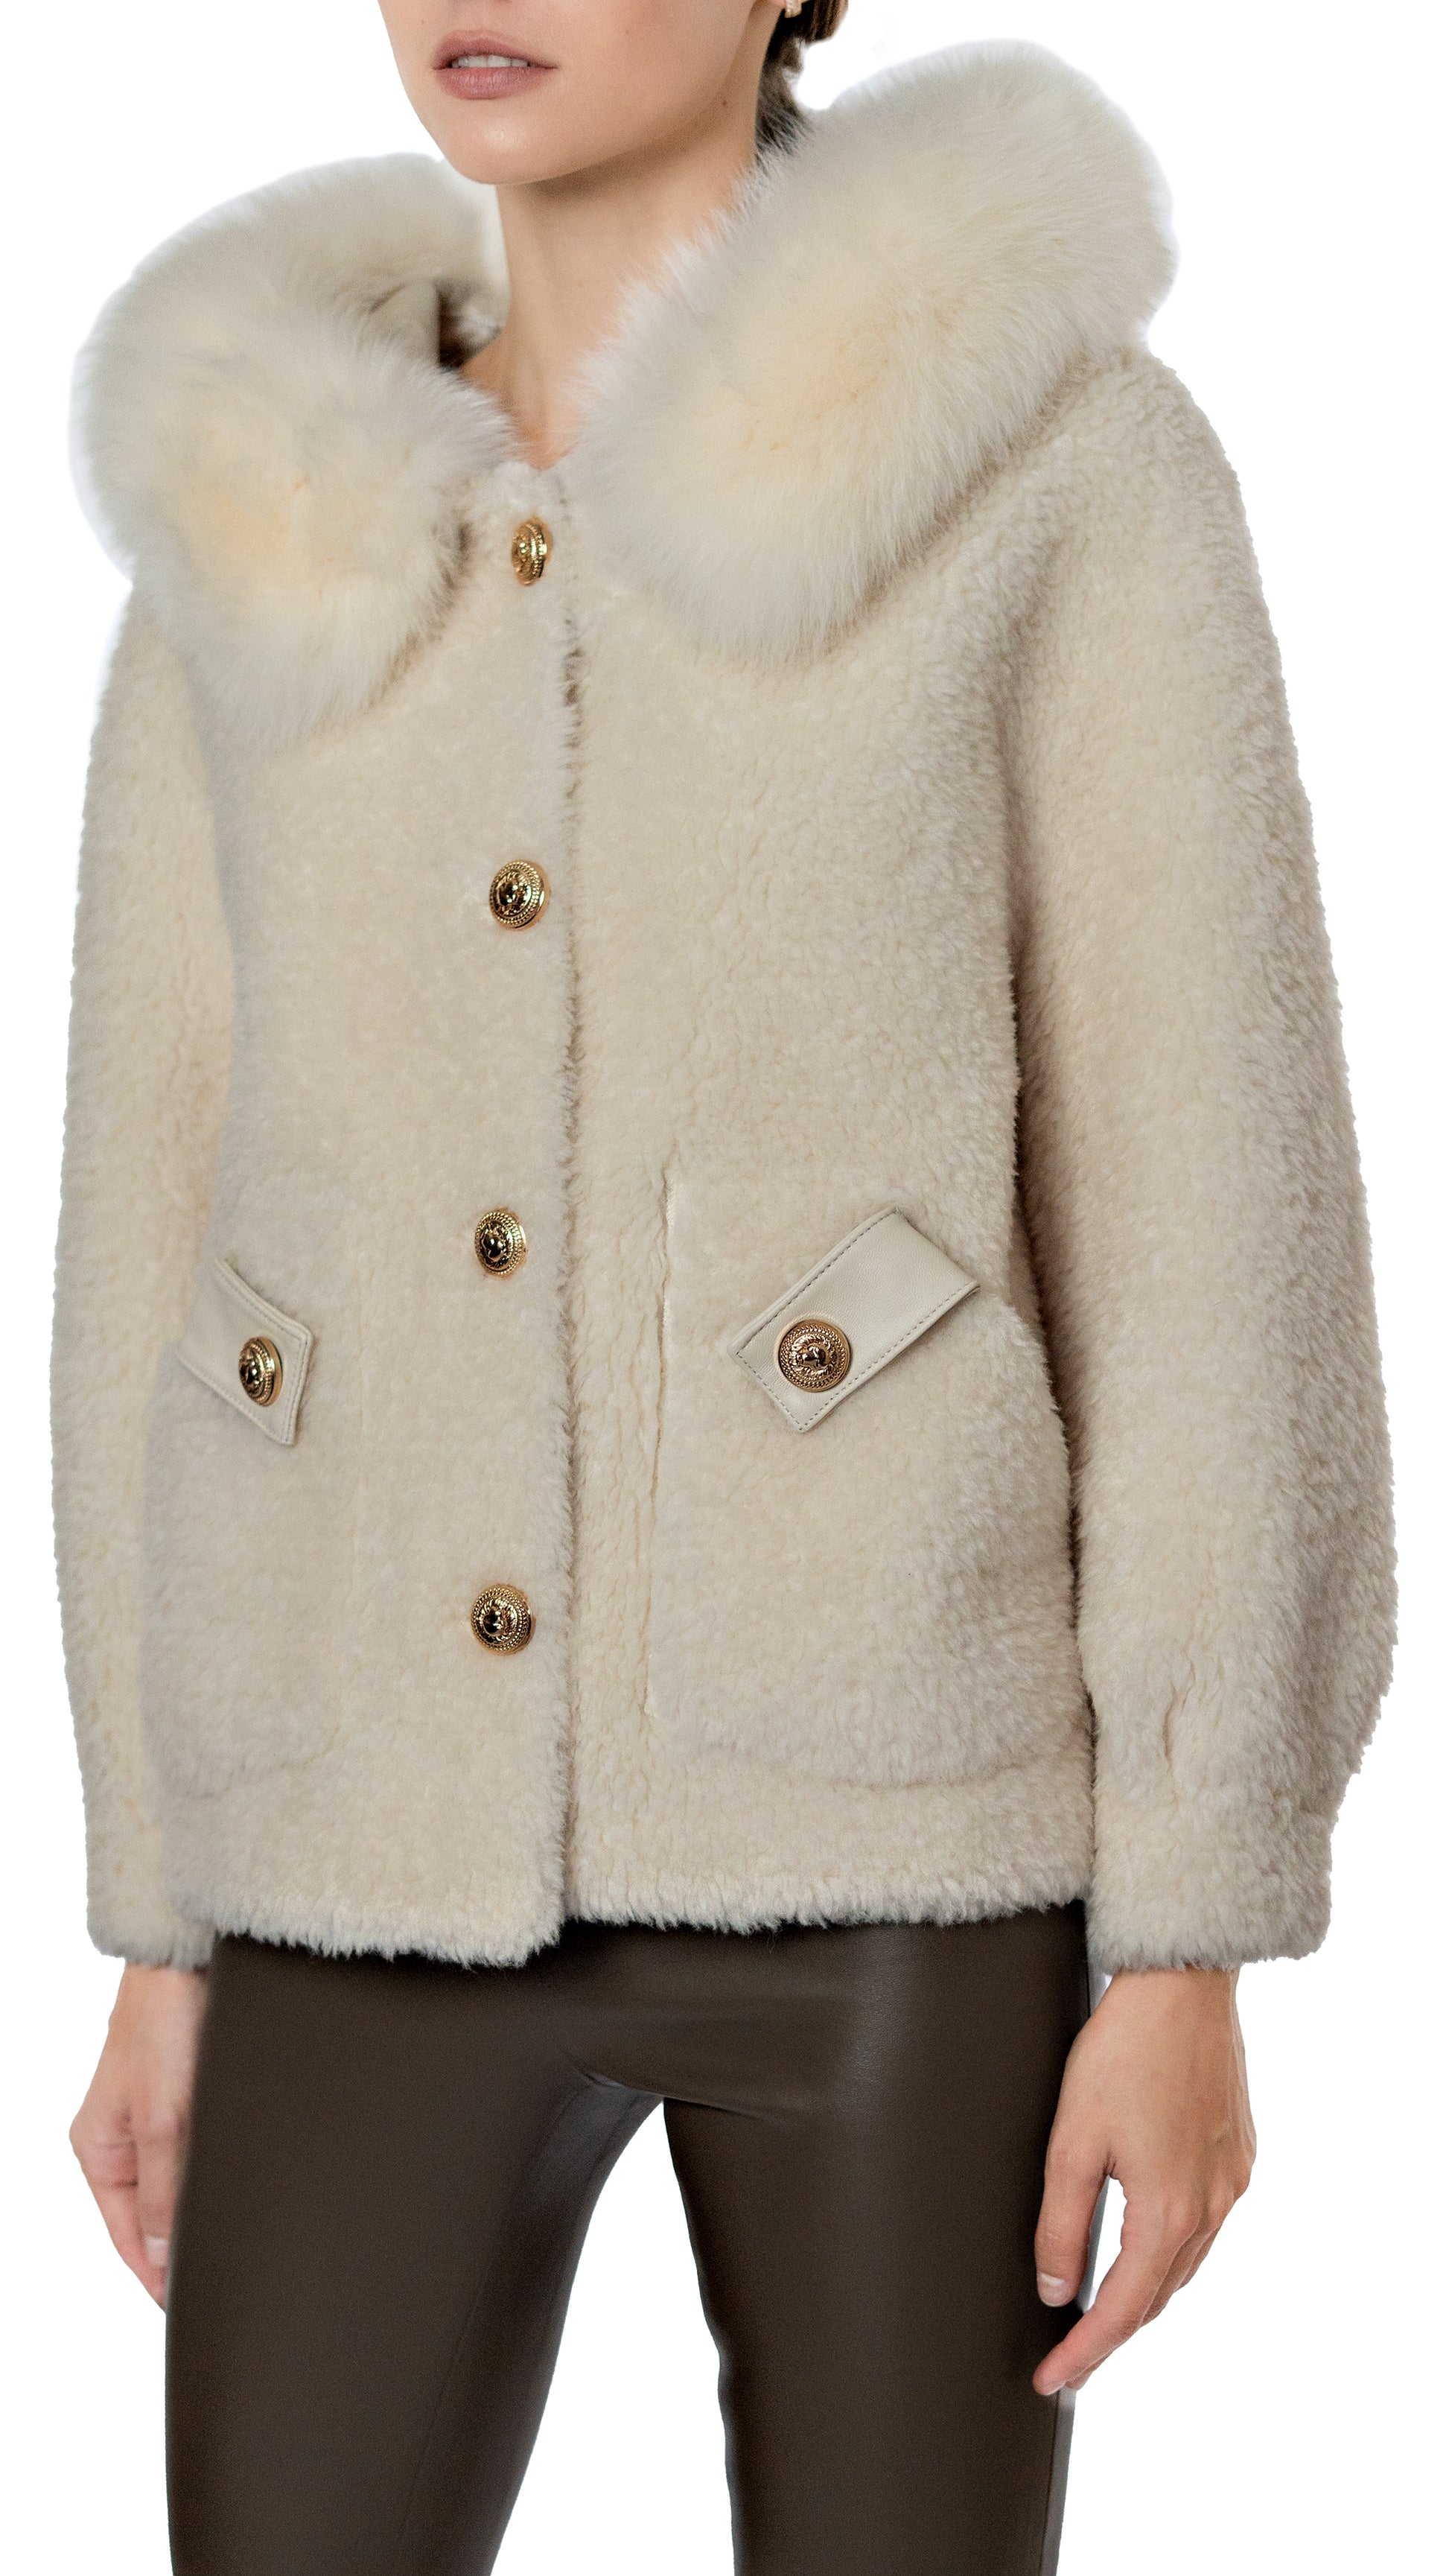 Daniella Erin shearling jacket with gold buttons and fur trimmed hood in ivory